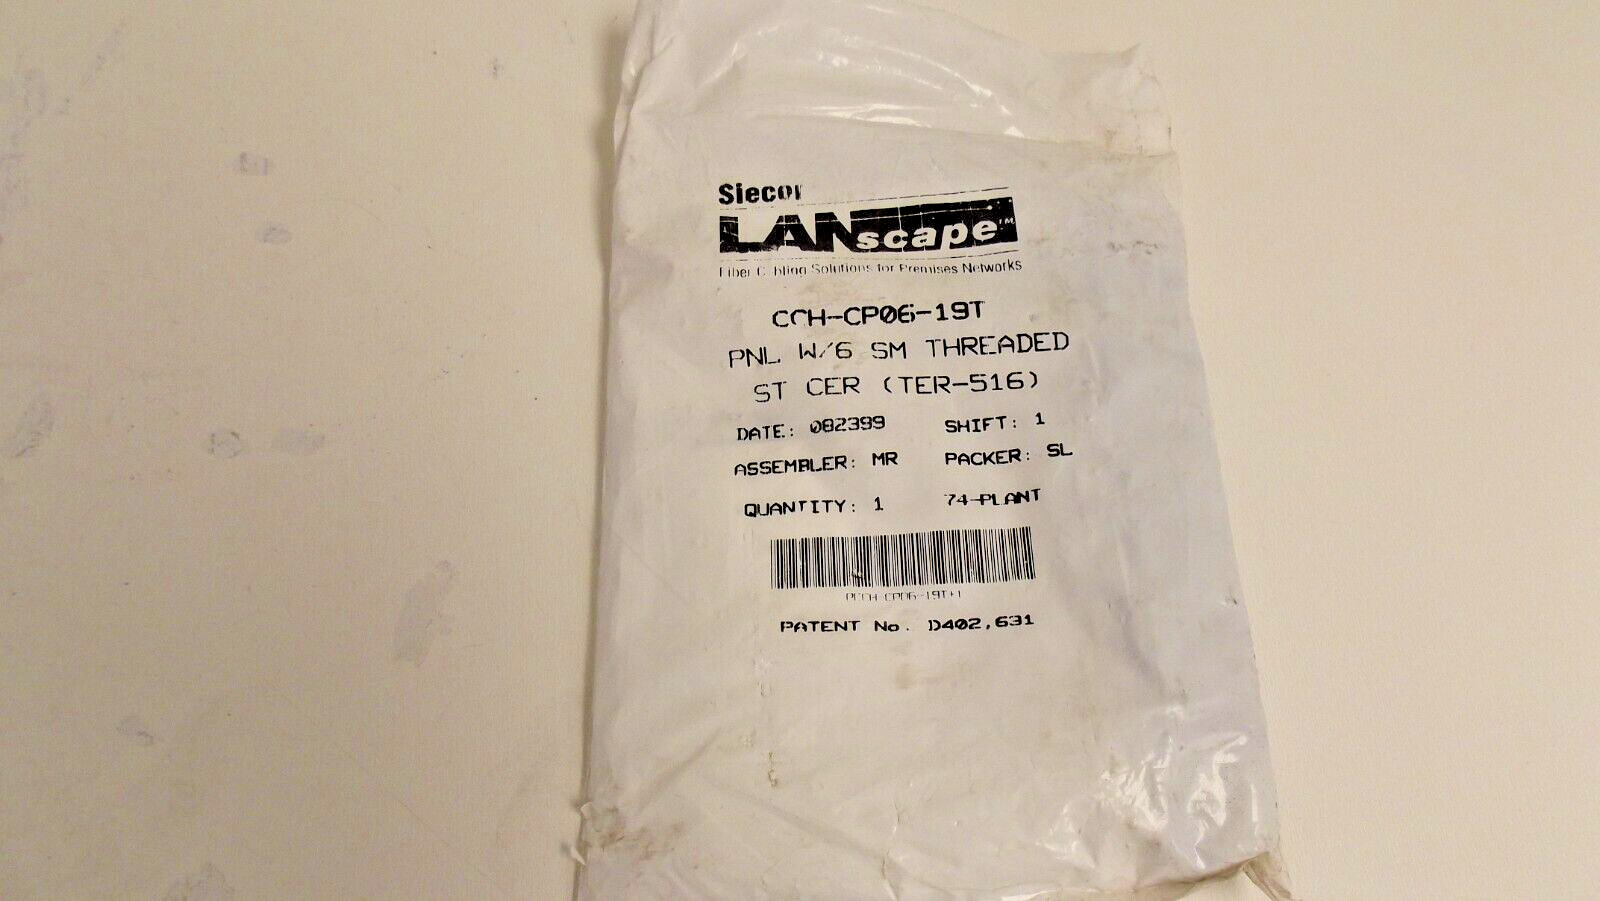 Siecor LanScape Corning CCH-CP06-19T Panel W/6 SM Threaded ST cer (TER-516)  A-9